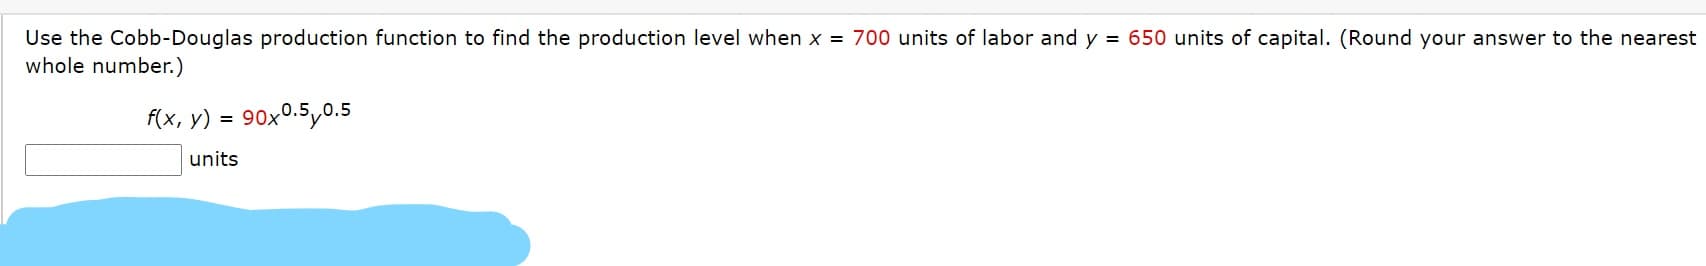 Use the Cobb-Douglas production function to find the production level when x = 700 units of labor and y = 650 units of capital. (Round your answer to the nearest
whole number.)
f(x, y)
90x0.5,0.5
units
